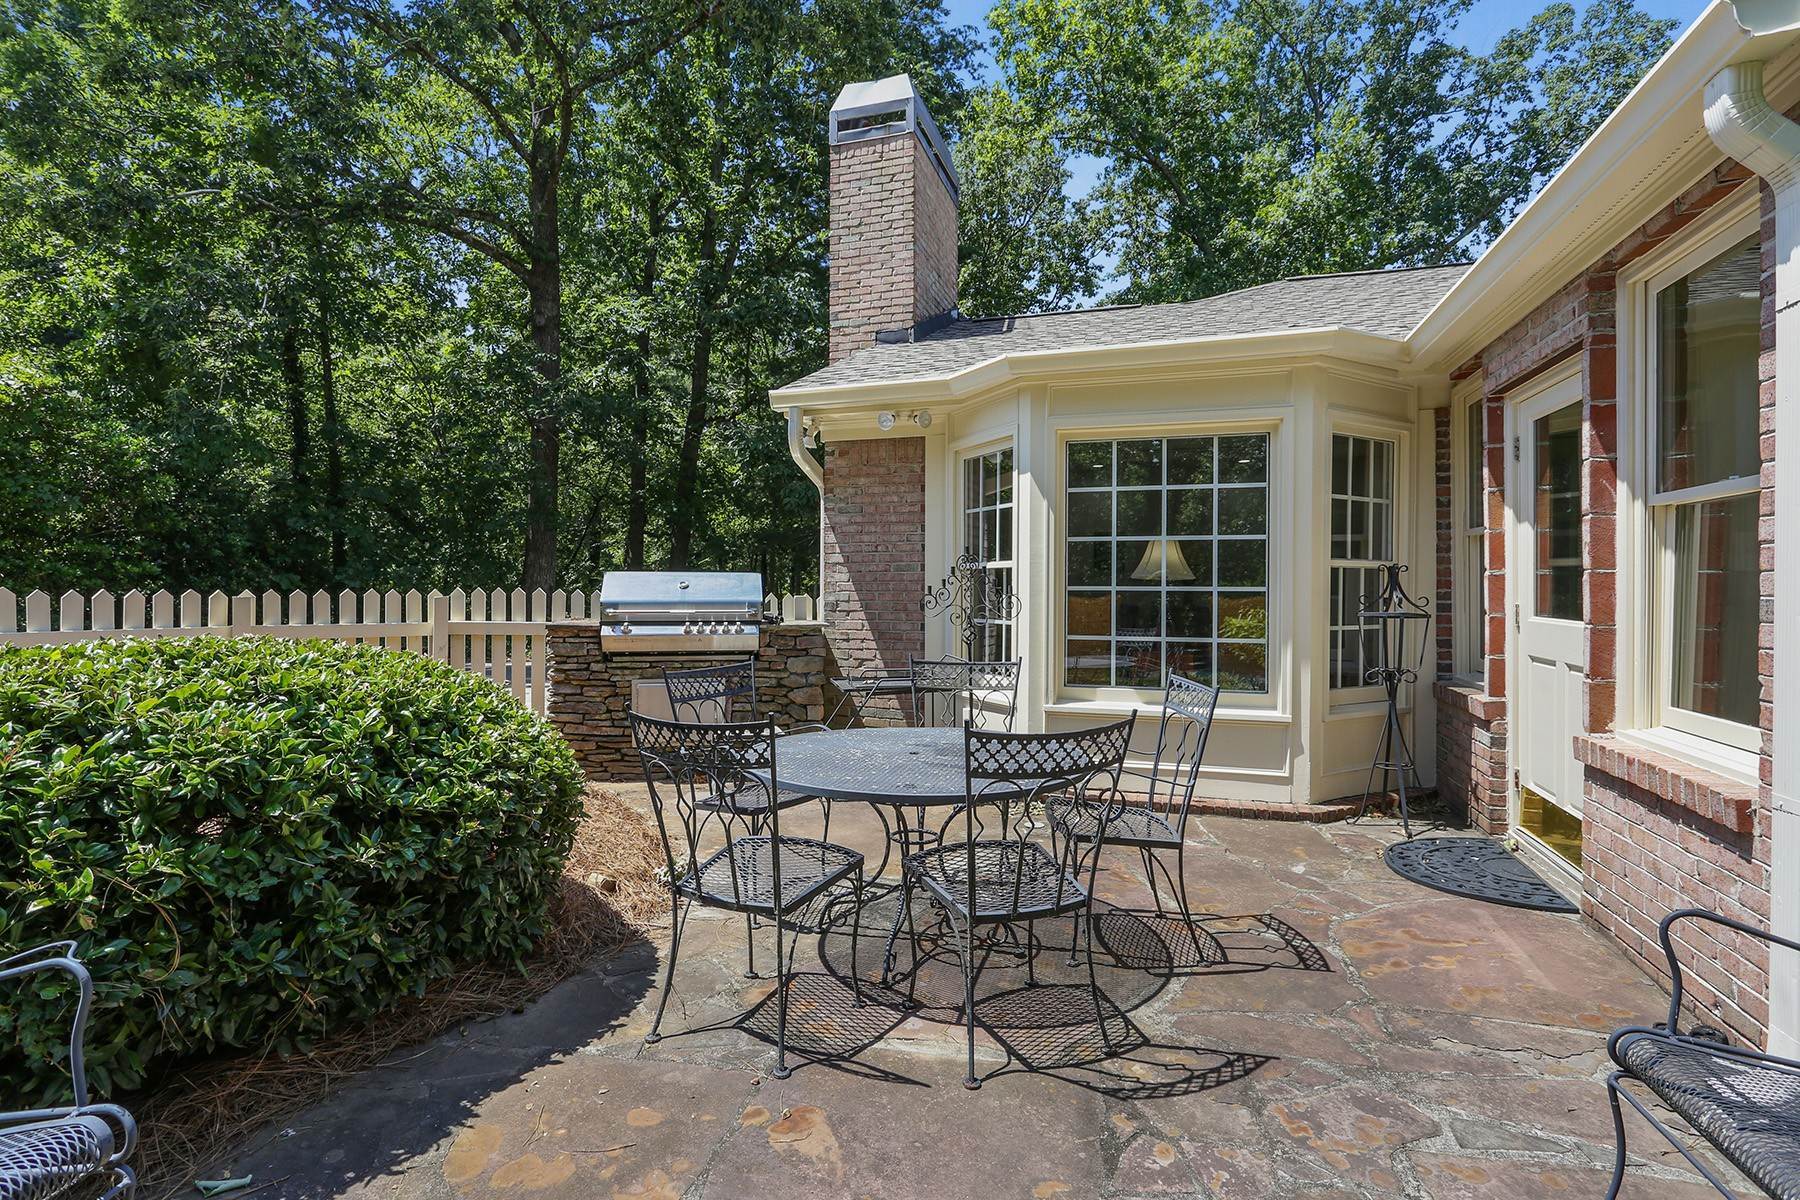 39. Single Family Homes for Sale at Beautiful Home on Private 2.1+/- Acre Lot 405 Heards Ferry Road Sandy Springs, Georgia 30328 United States